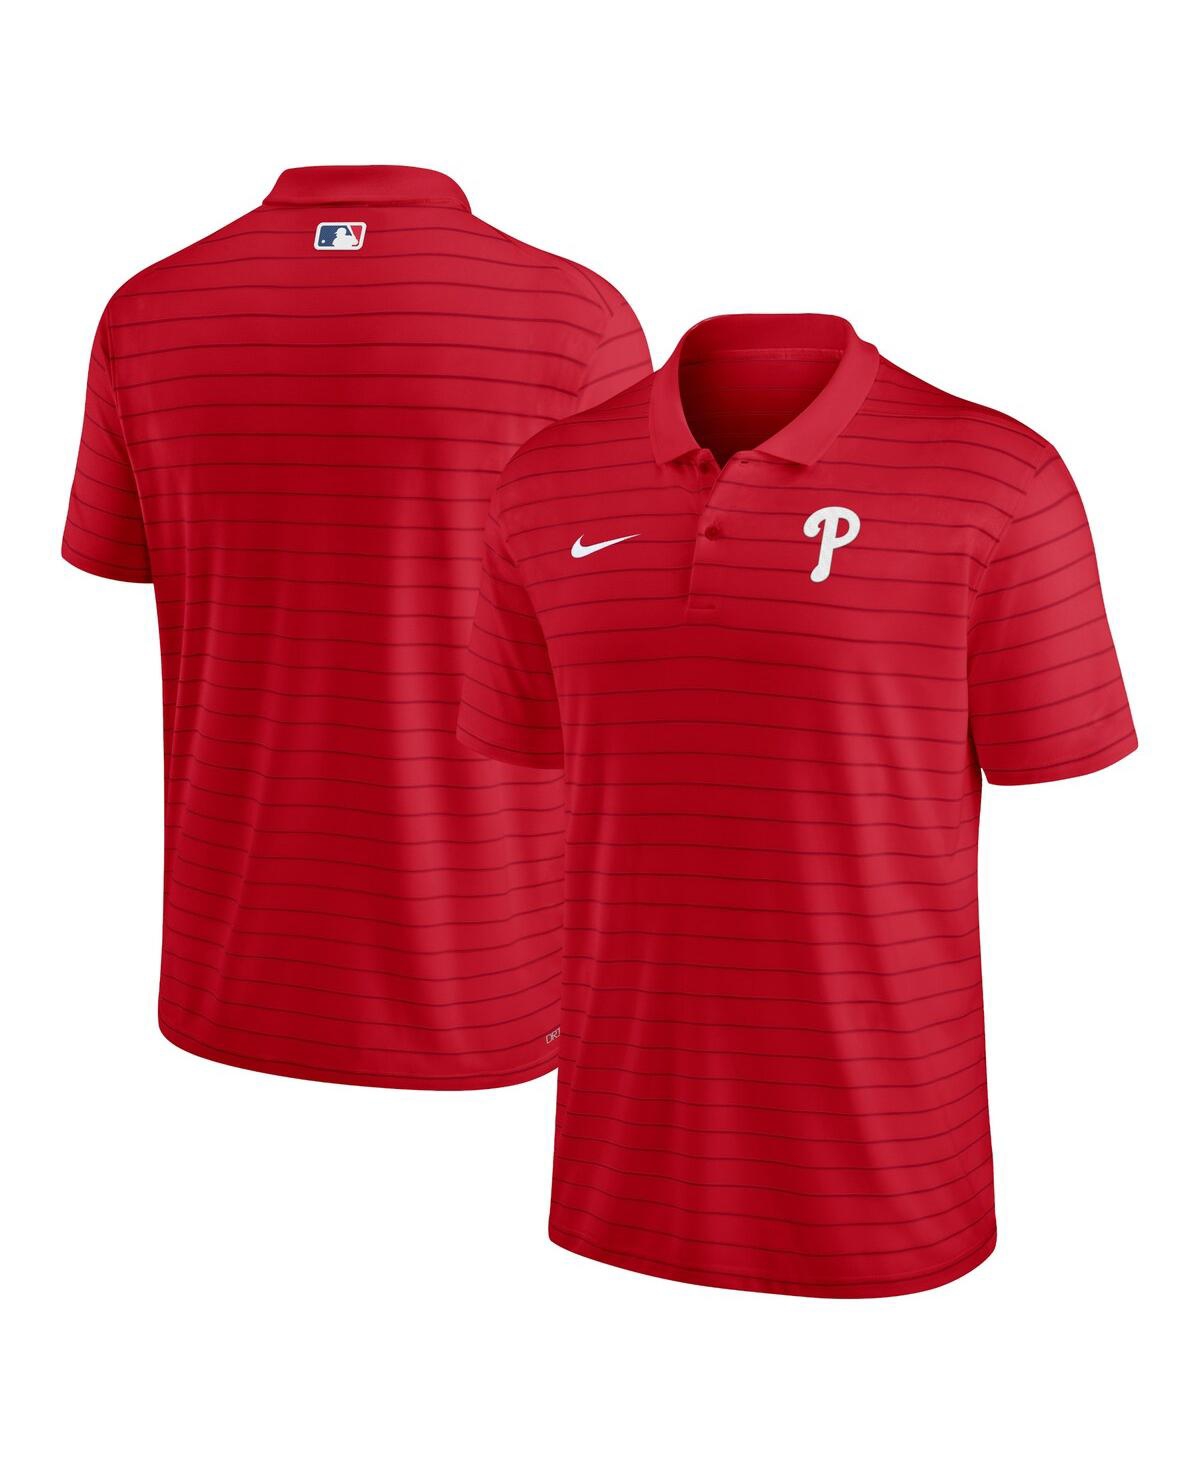 NIKE MEN'S NIKE RED PHILADELPHIA PHILLIES AUTHENTIC COLLECTION VICTORY STRIPED PERFORMANCE POLO SHIRT